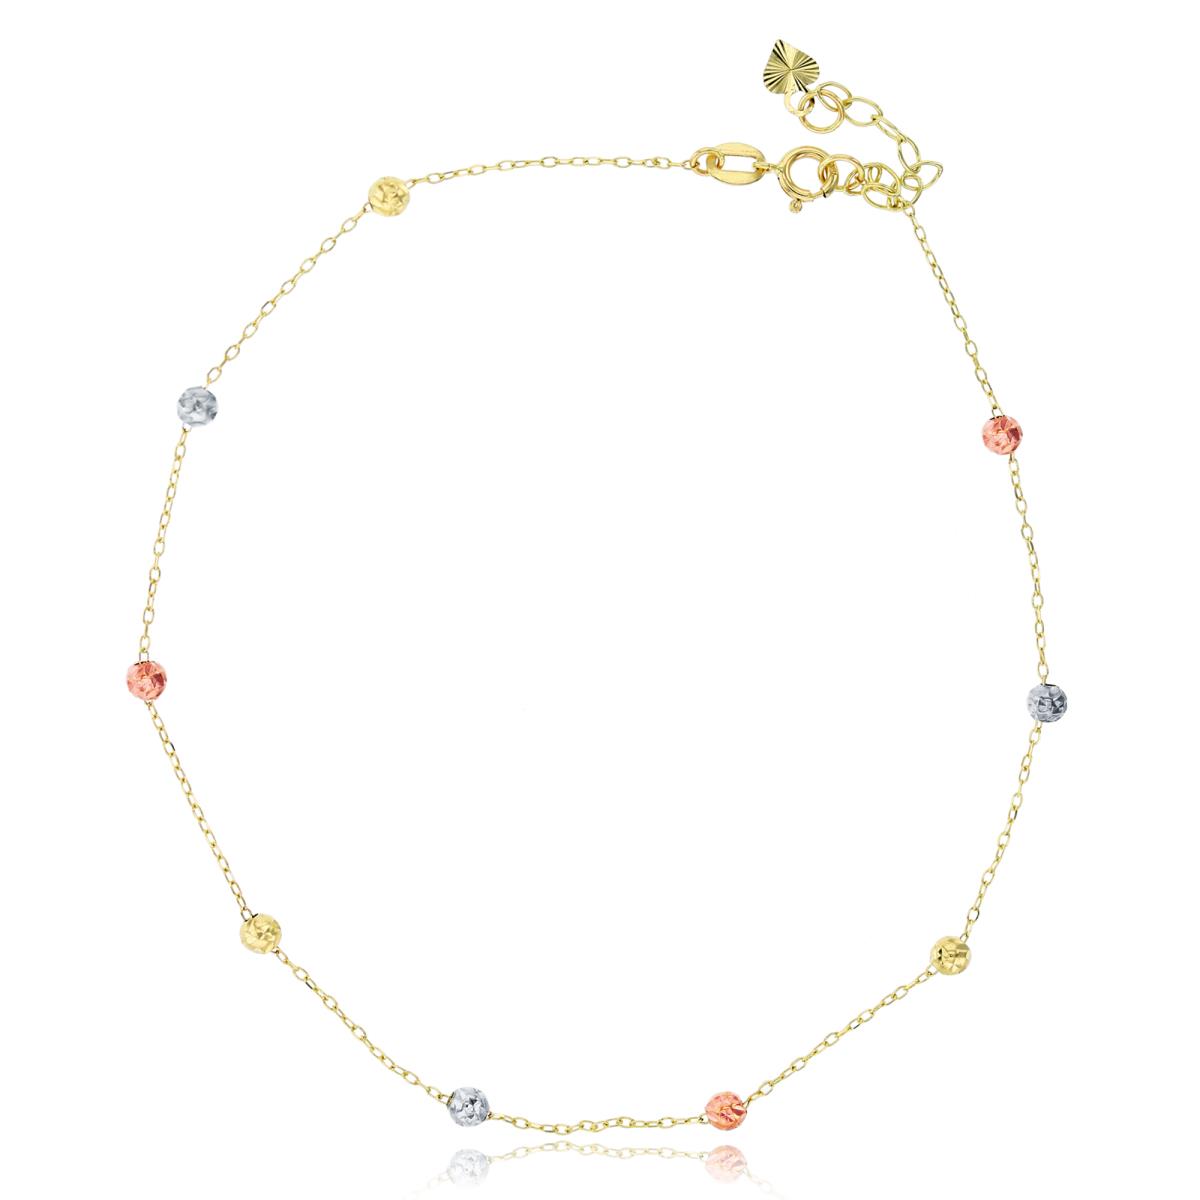 10K Tricolor Gold Cable Chain with Star DC Beads & Swiss DC Heart Drop 9+1" Anklet